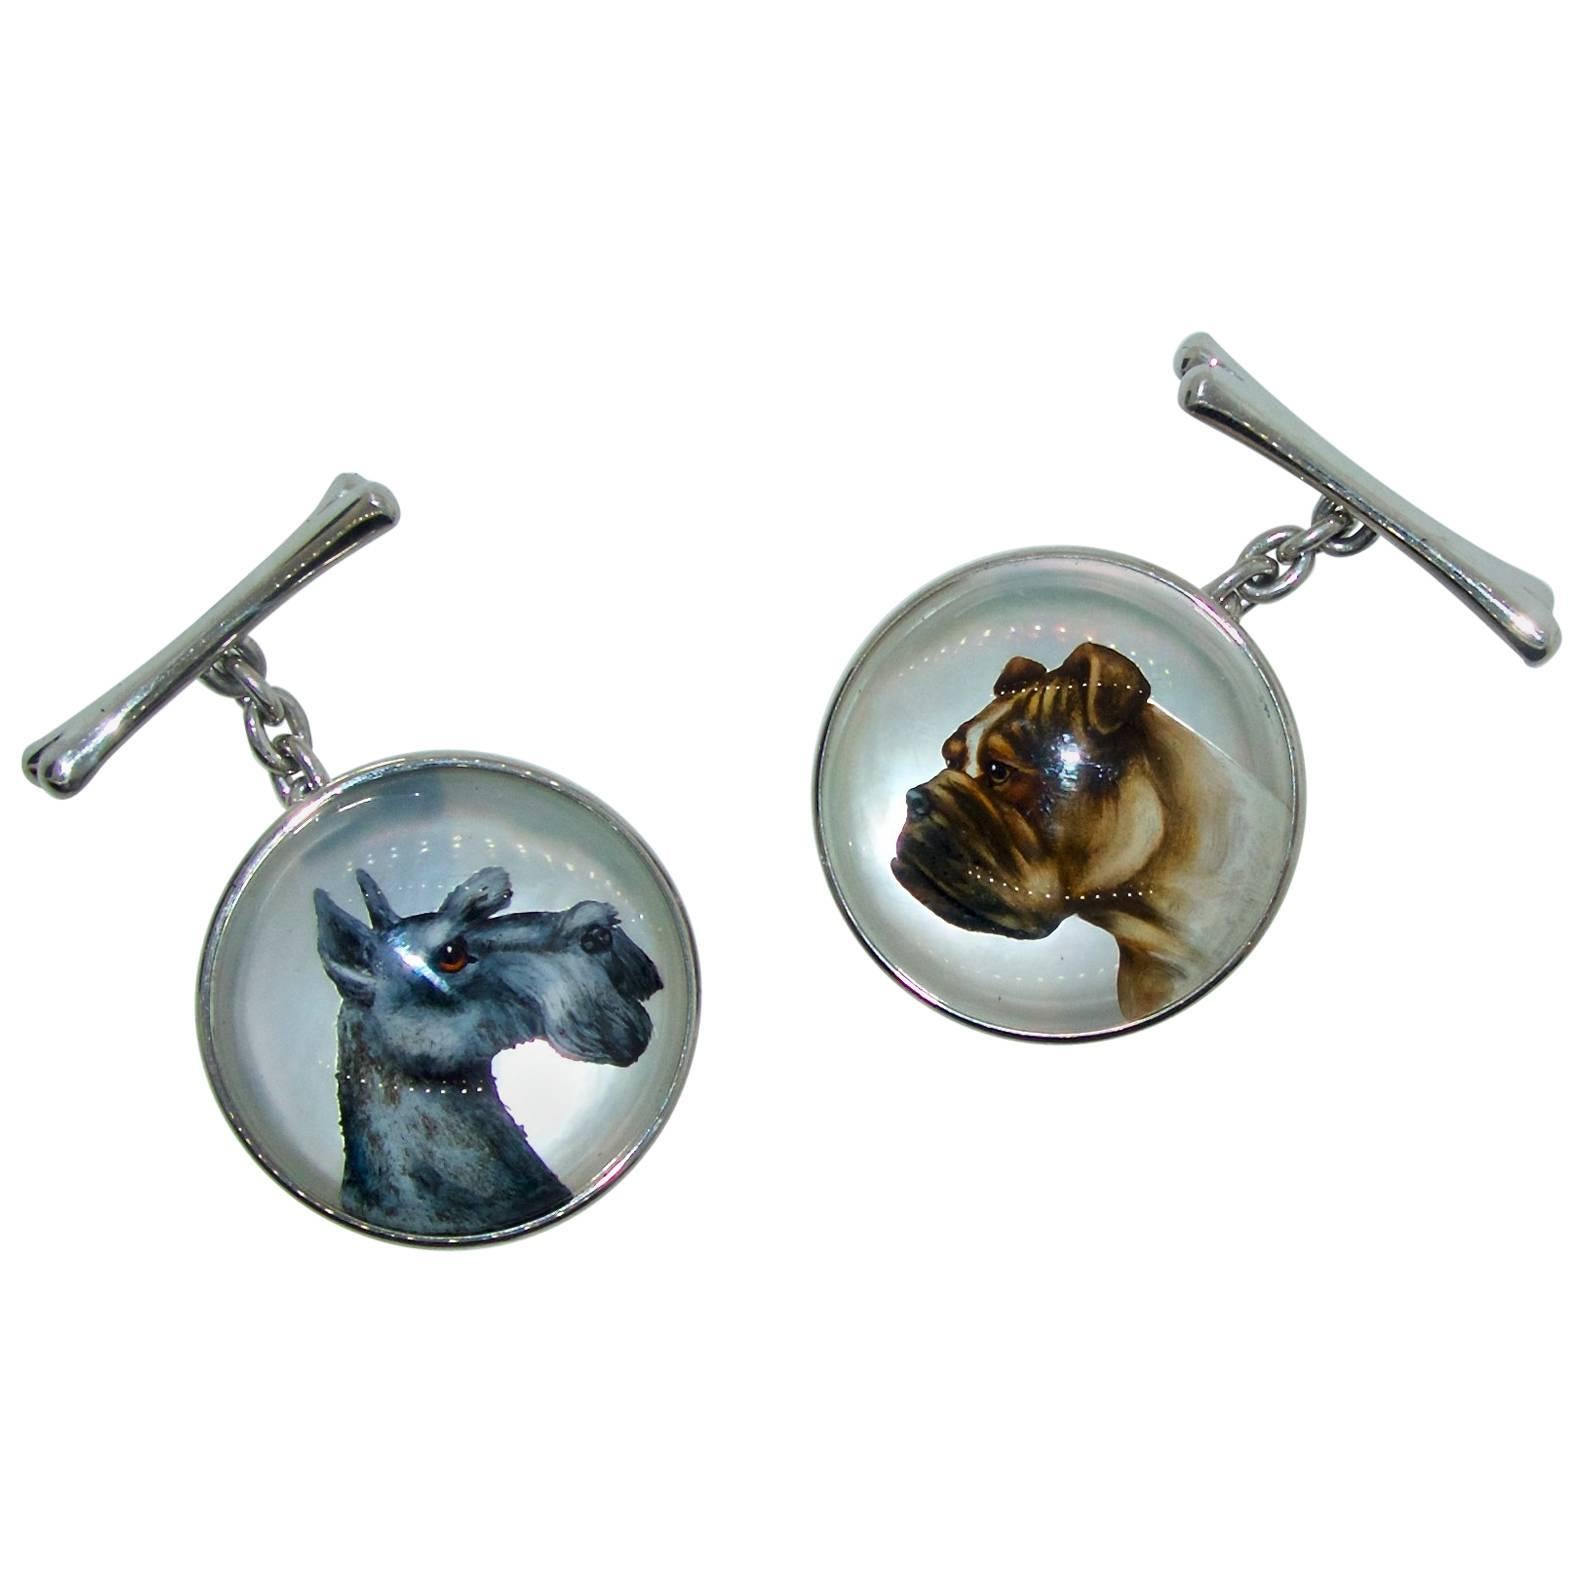 Cufflinks with Essex Crystals, these cufflinks are of  finely painted dogs on mother of pearl and placed under Rock Crystal, these cufflinks are platinum with platinum dog bone elements as the other side of the paintings.  Rarely do we find such